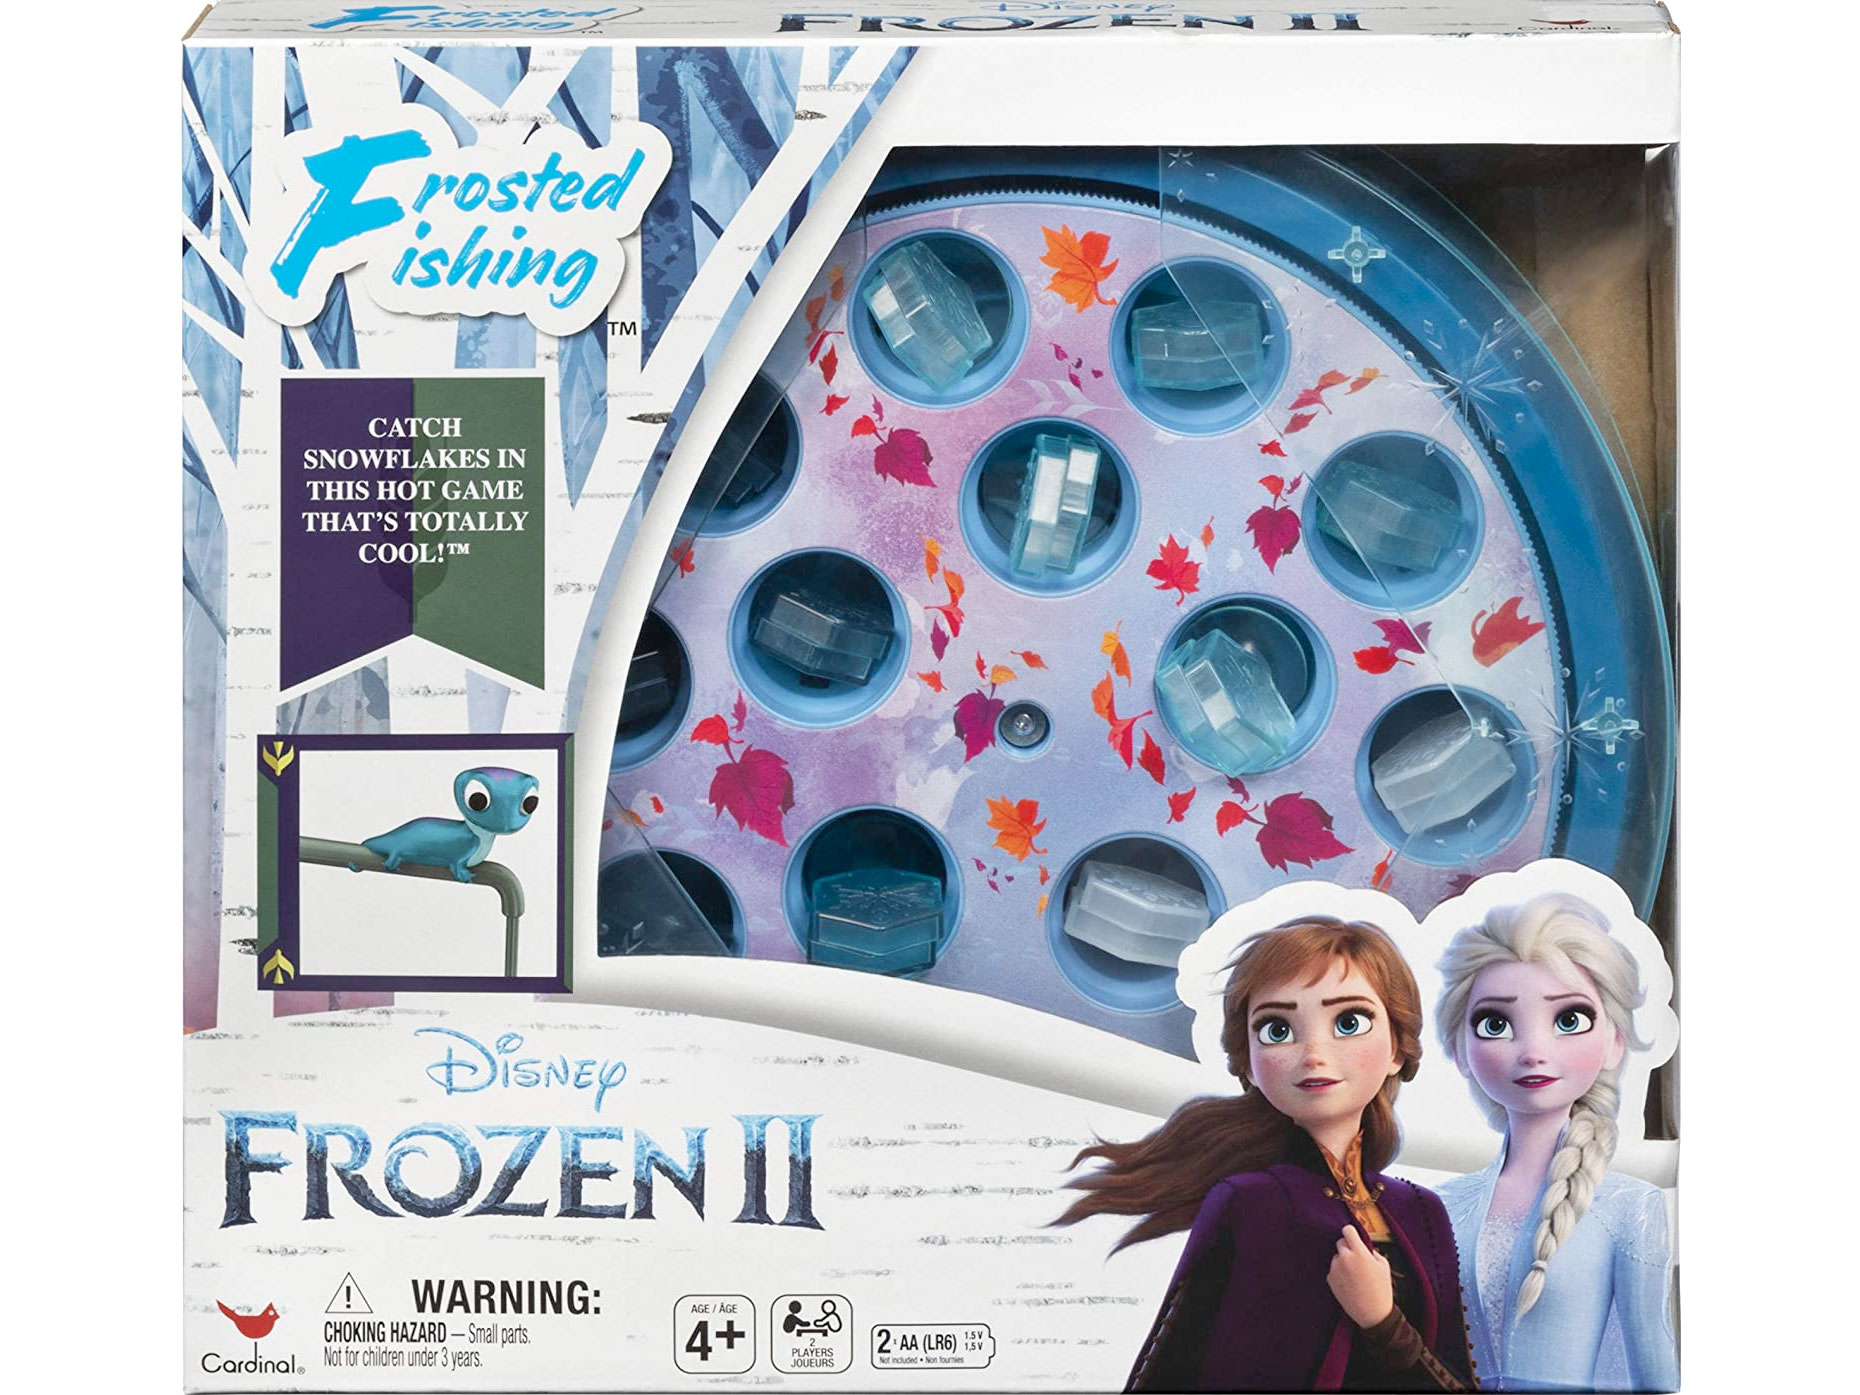 Amazon：Disney Frozen 2 Frosted Fishing Game只卖$9.64